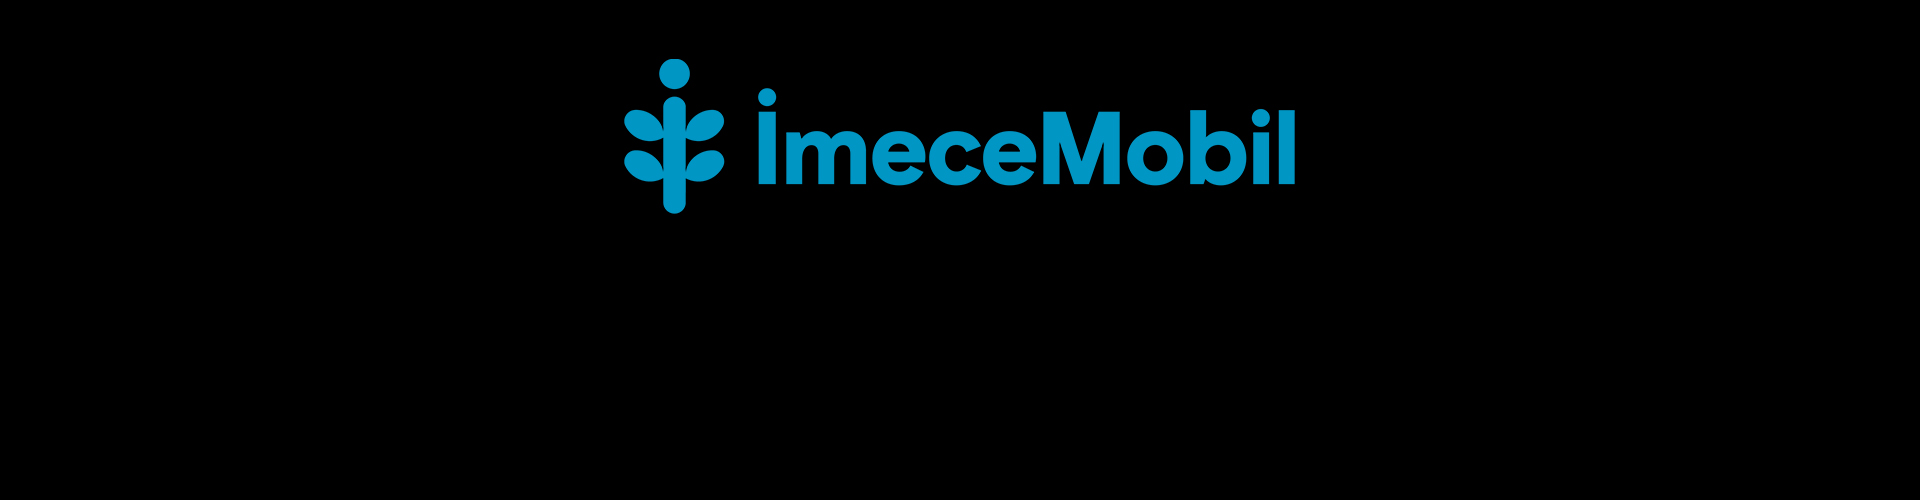 Softtech wins “The Best In-house Entrepreneurship Project” award ImeceMobil, the Technology Serving to Farmers, has returned with another award